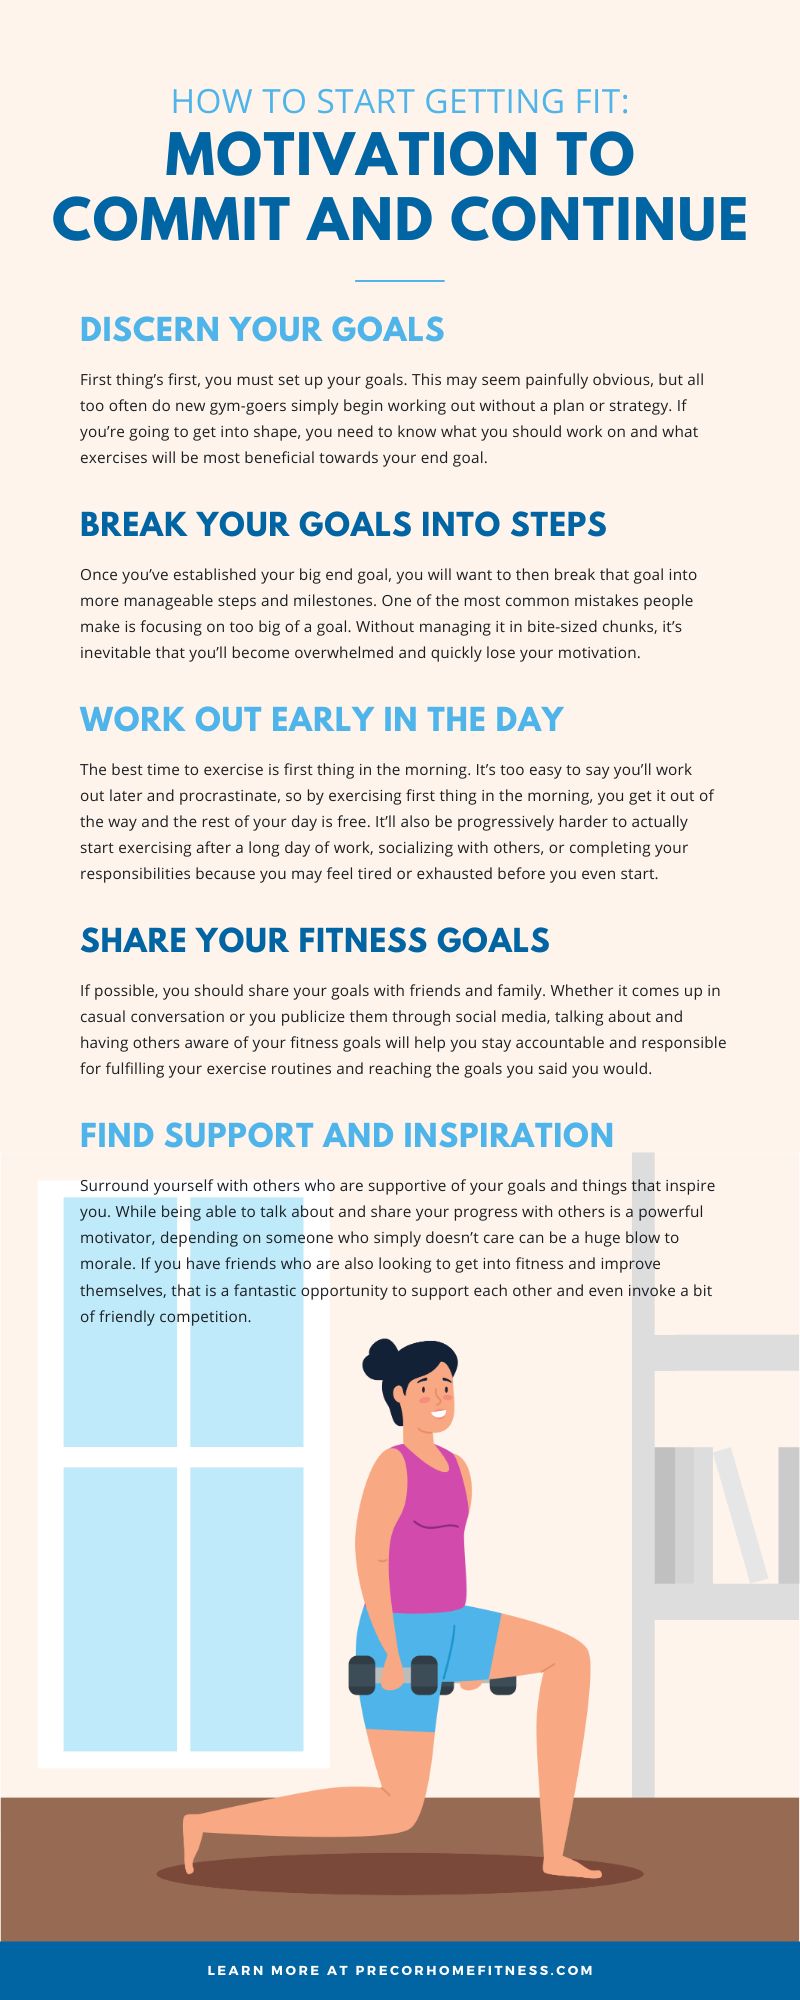 4 Ways To Get Back in the Gym and Stay Motivated